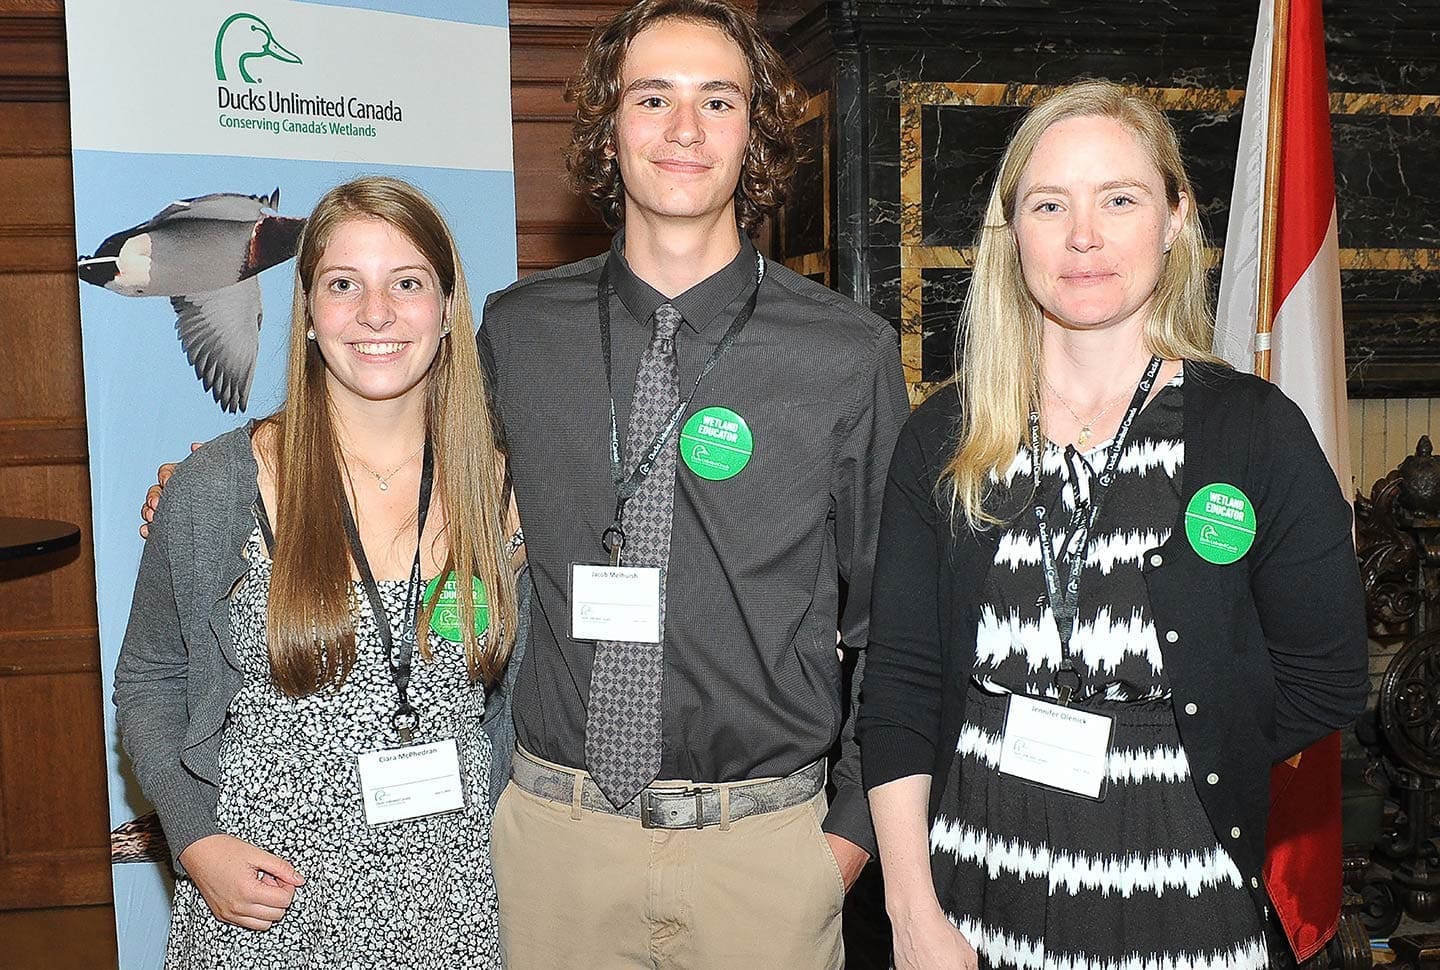 Ducks Unlimited Canada youth advocates